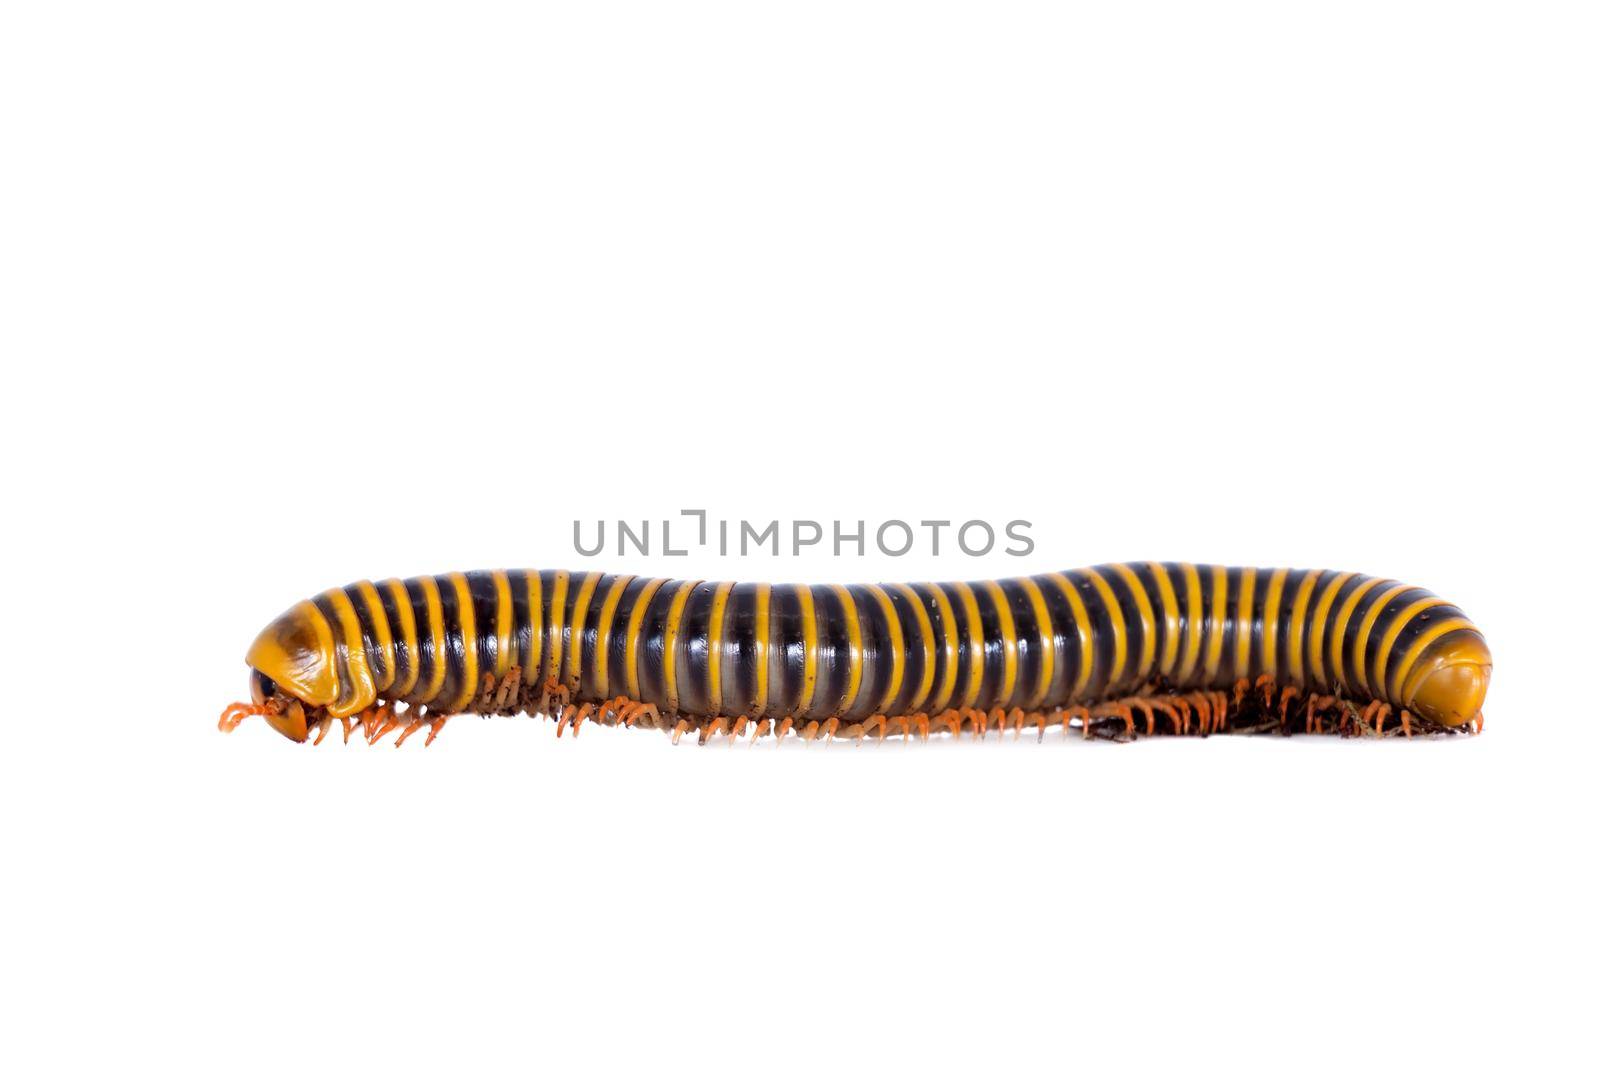 Millipede on white by RosaJay